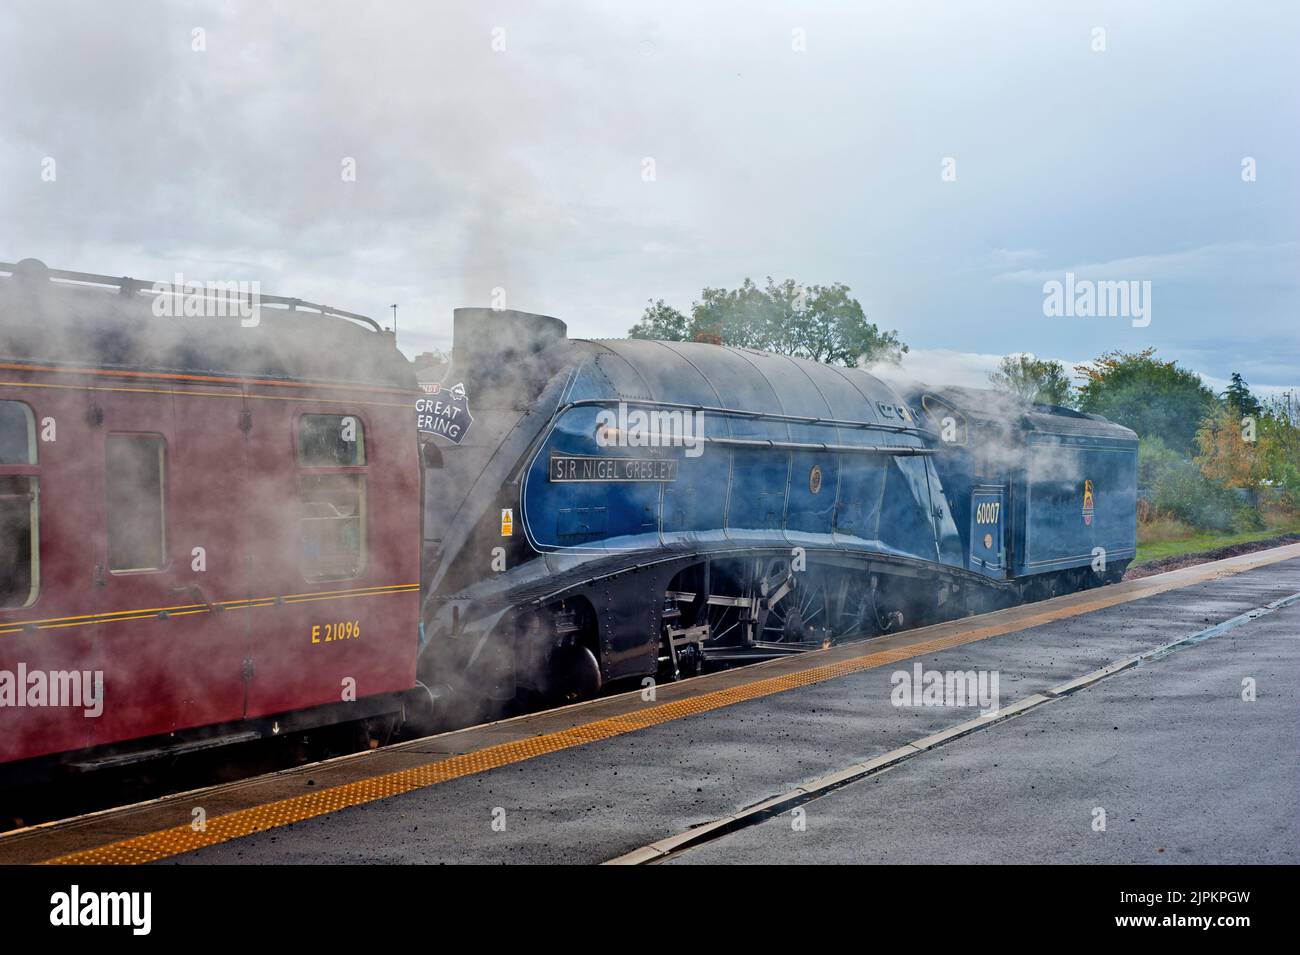 A4 Pacific No 60007 Sir Nigel Gresley in Eaglescliffe, Stockton on Tees, Cleveland, England Stockfoto